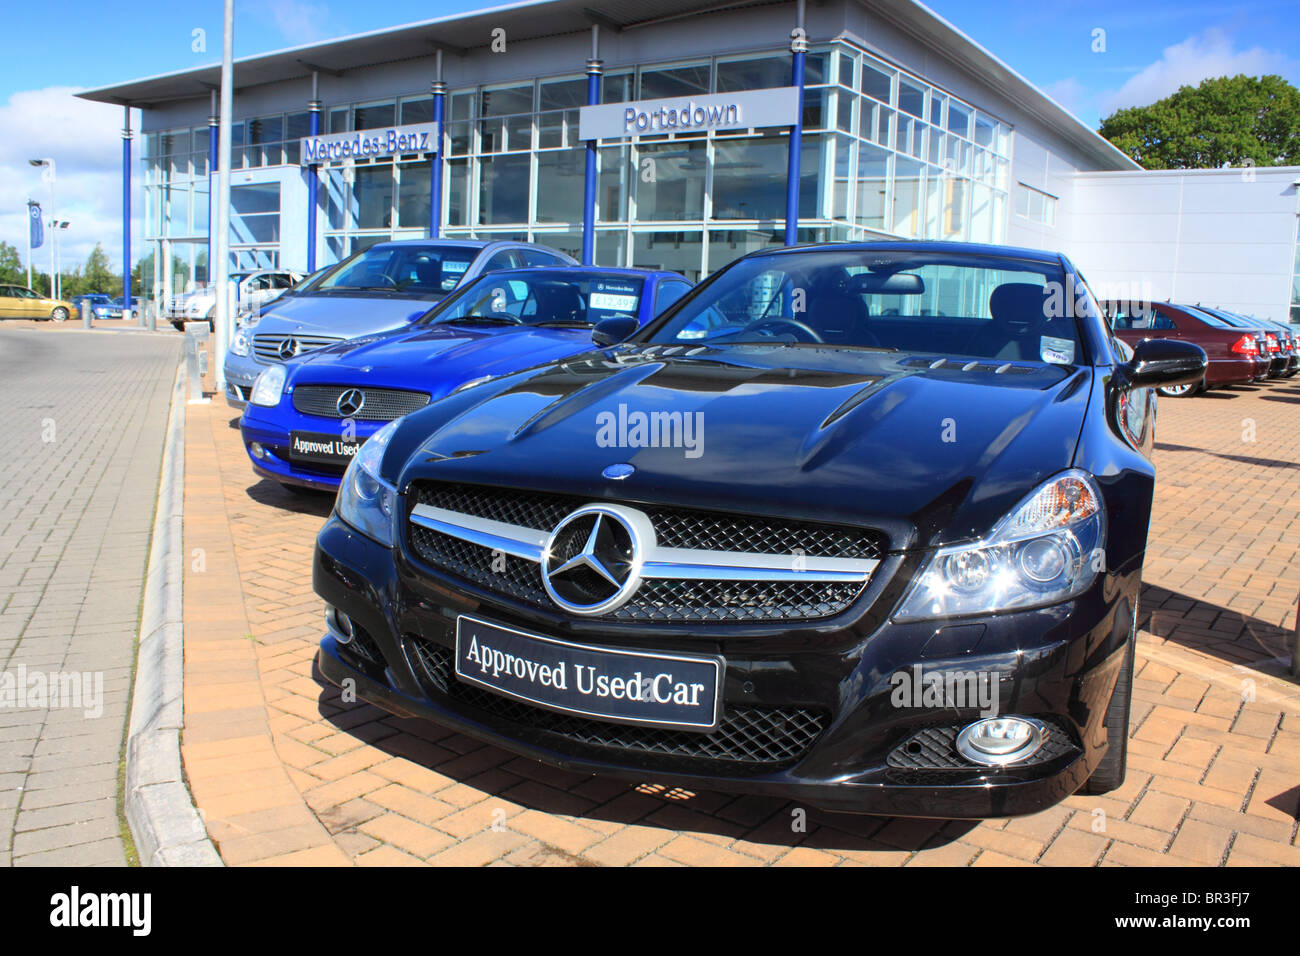 Row of used cars for sale on a Mercedes-Benz dealership forecourt Stock Photo